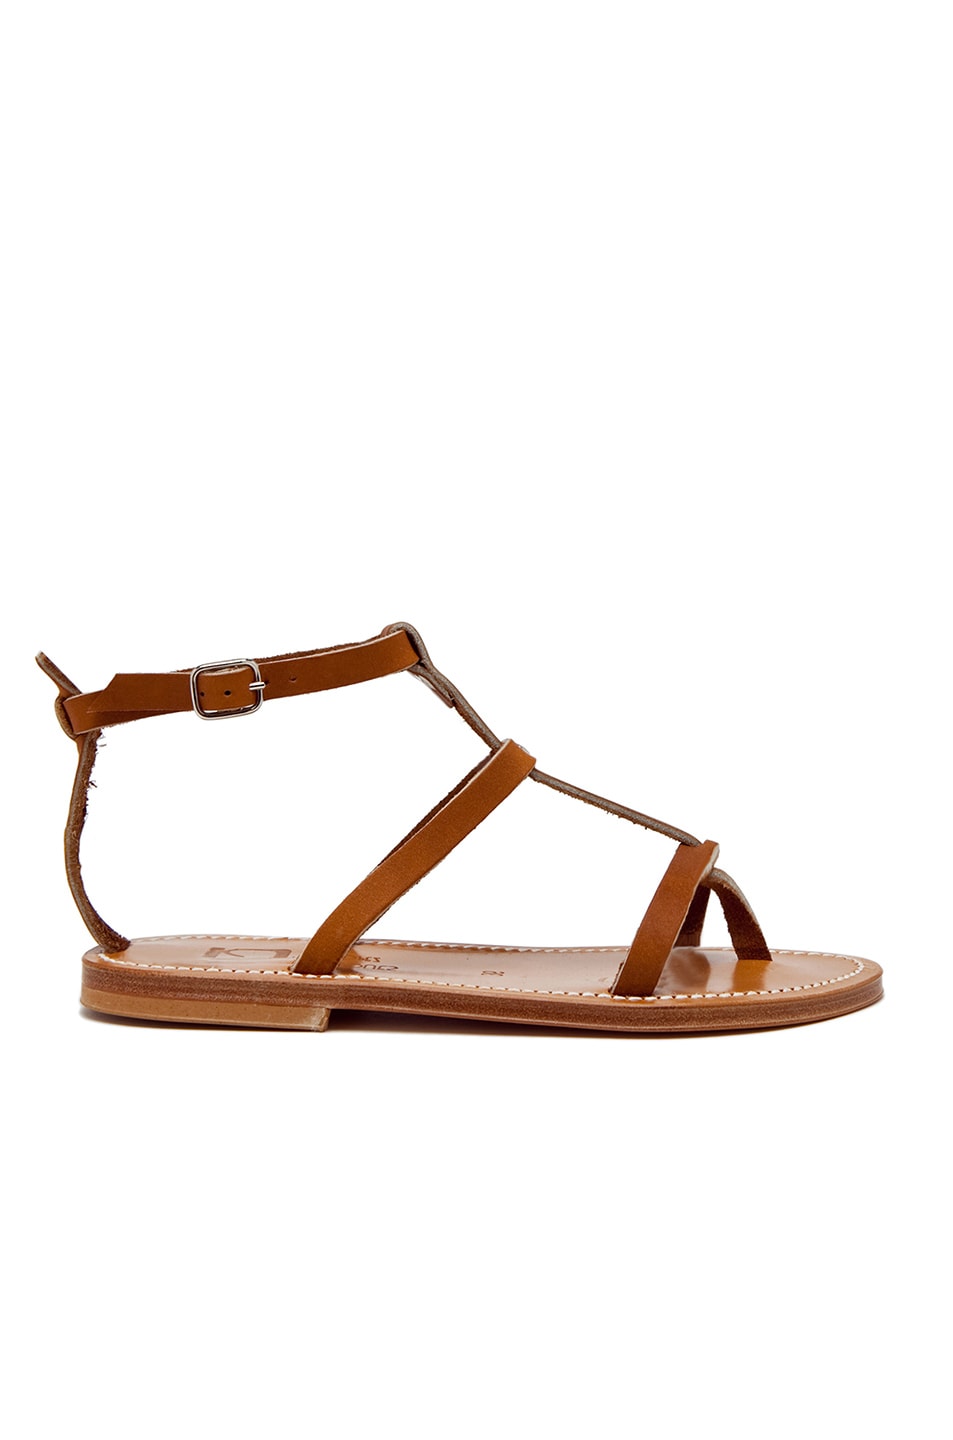 Image 1 of K Jacques K. Jacques Gina Leather Sandals in Natural